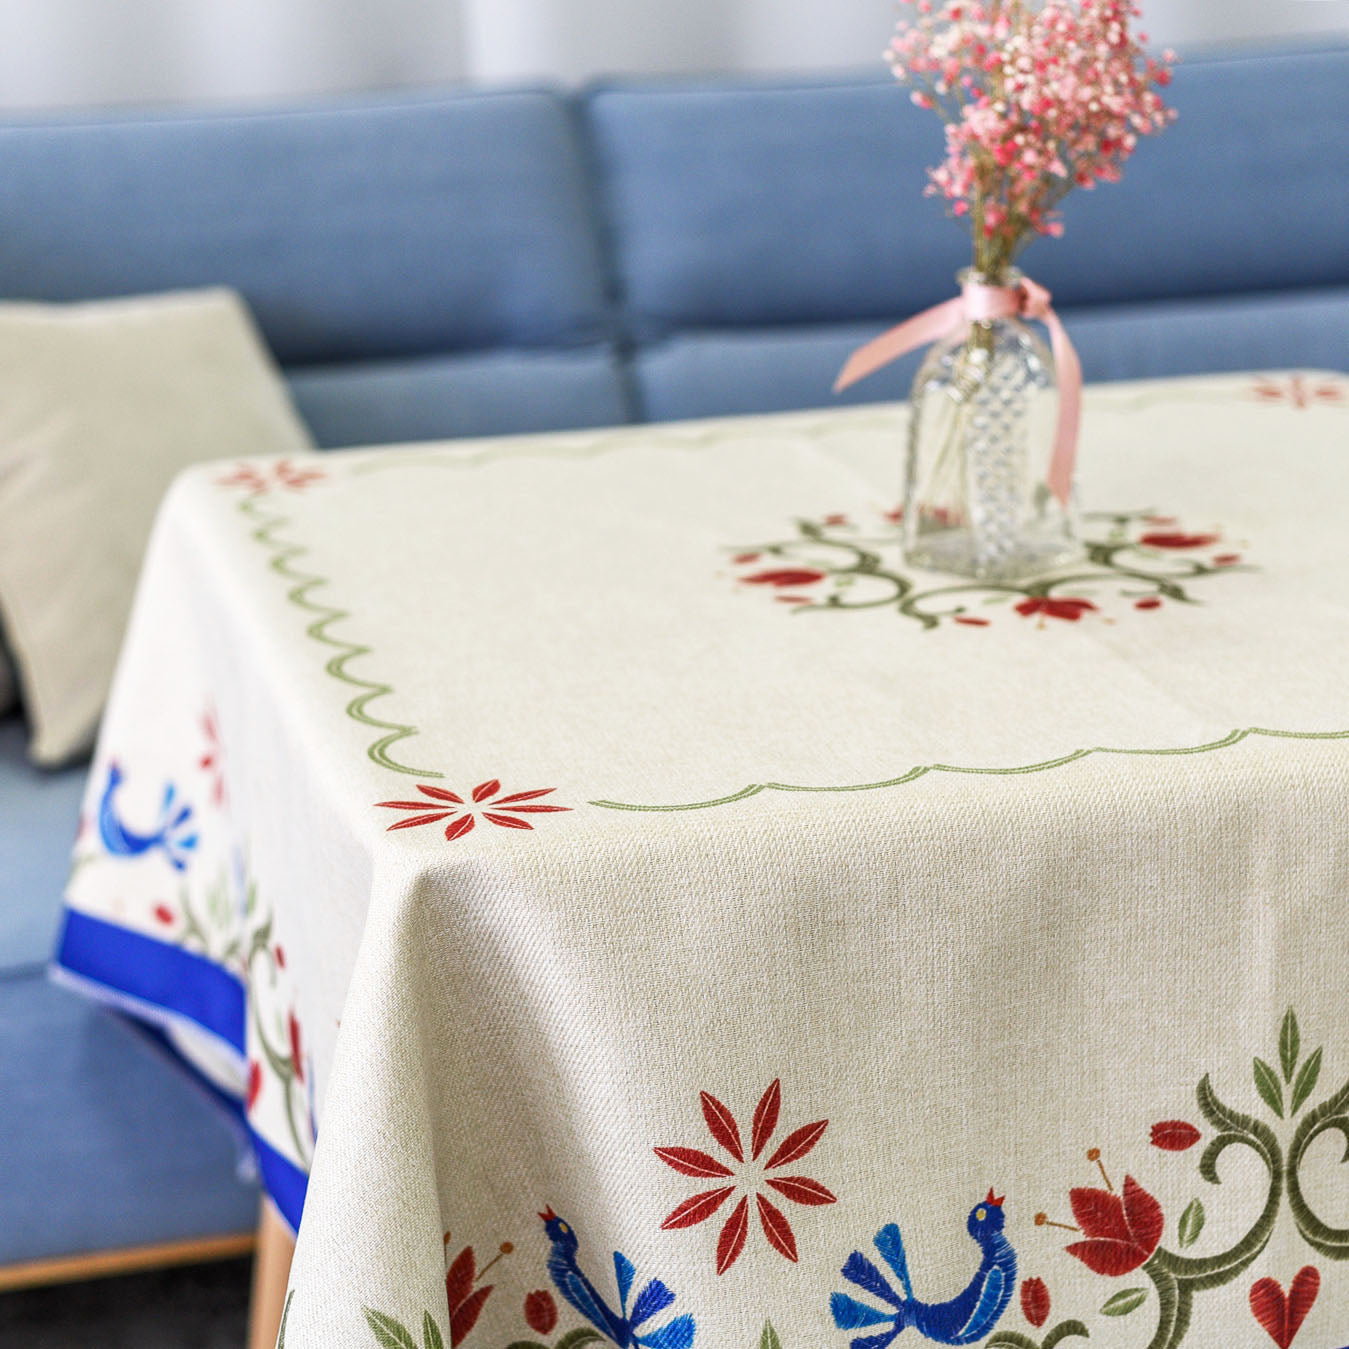 Table cloth made of recycled fabric "Etno #2"